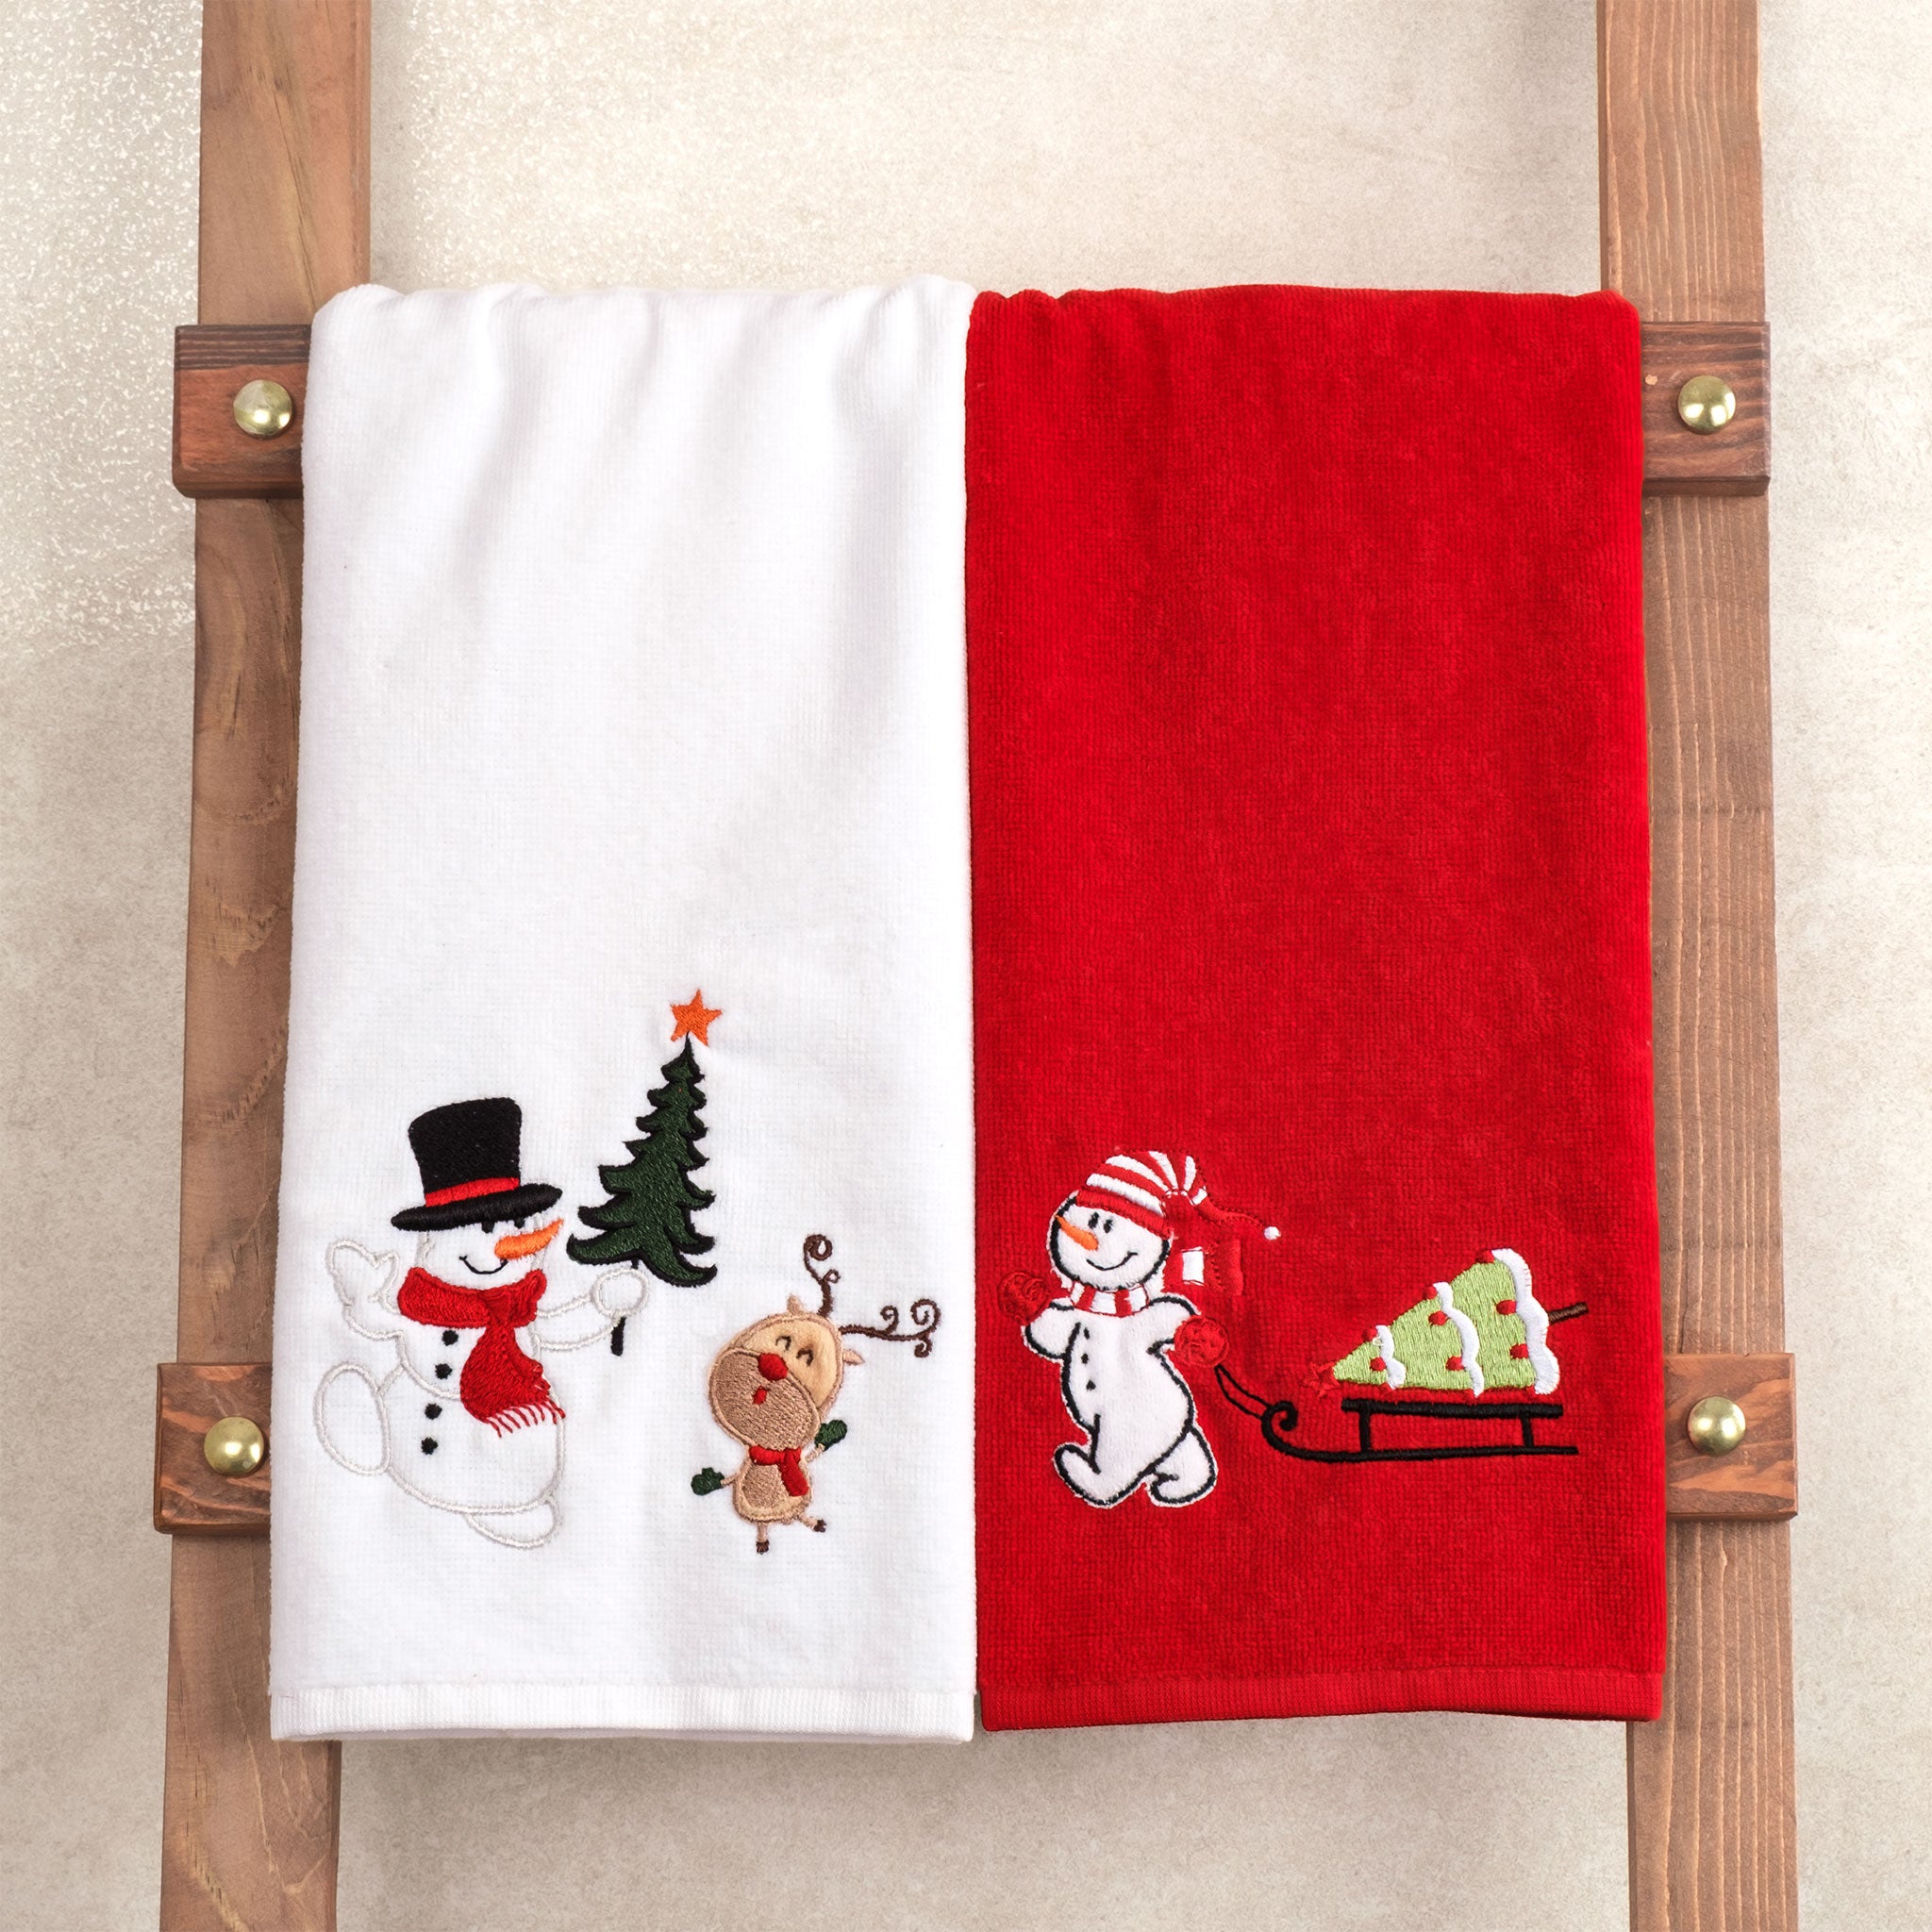 American Soft Linen - Christmas Towels 2  Packed Embroidered Towels for Decor Xmas - 60 Set Case Pack - Snowmen - 6